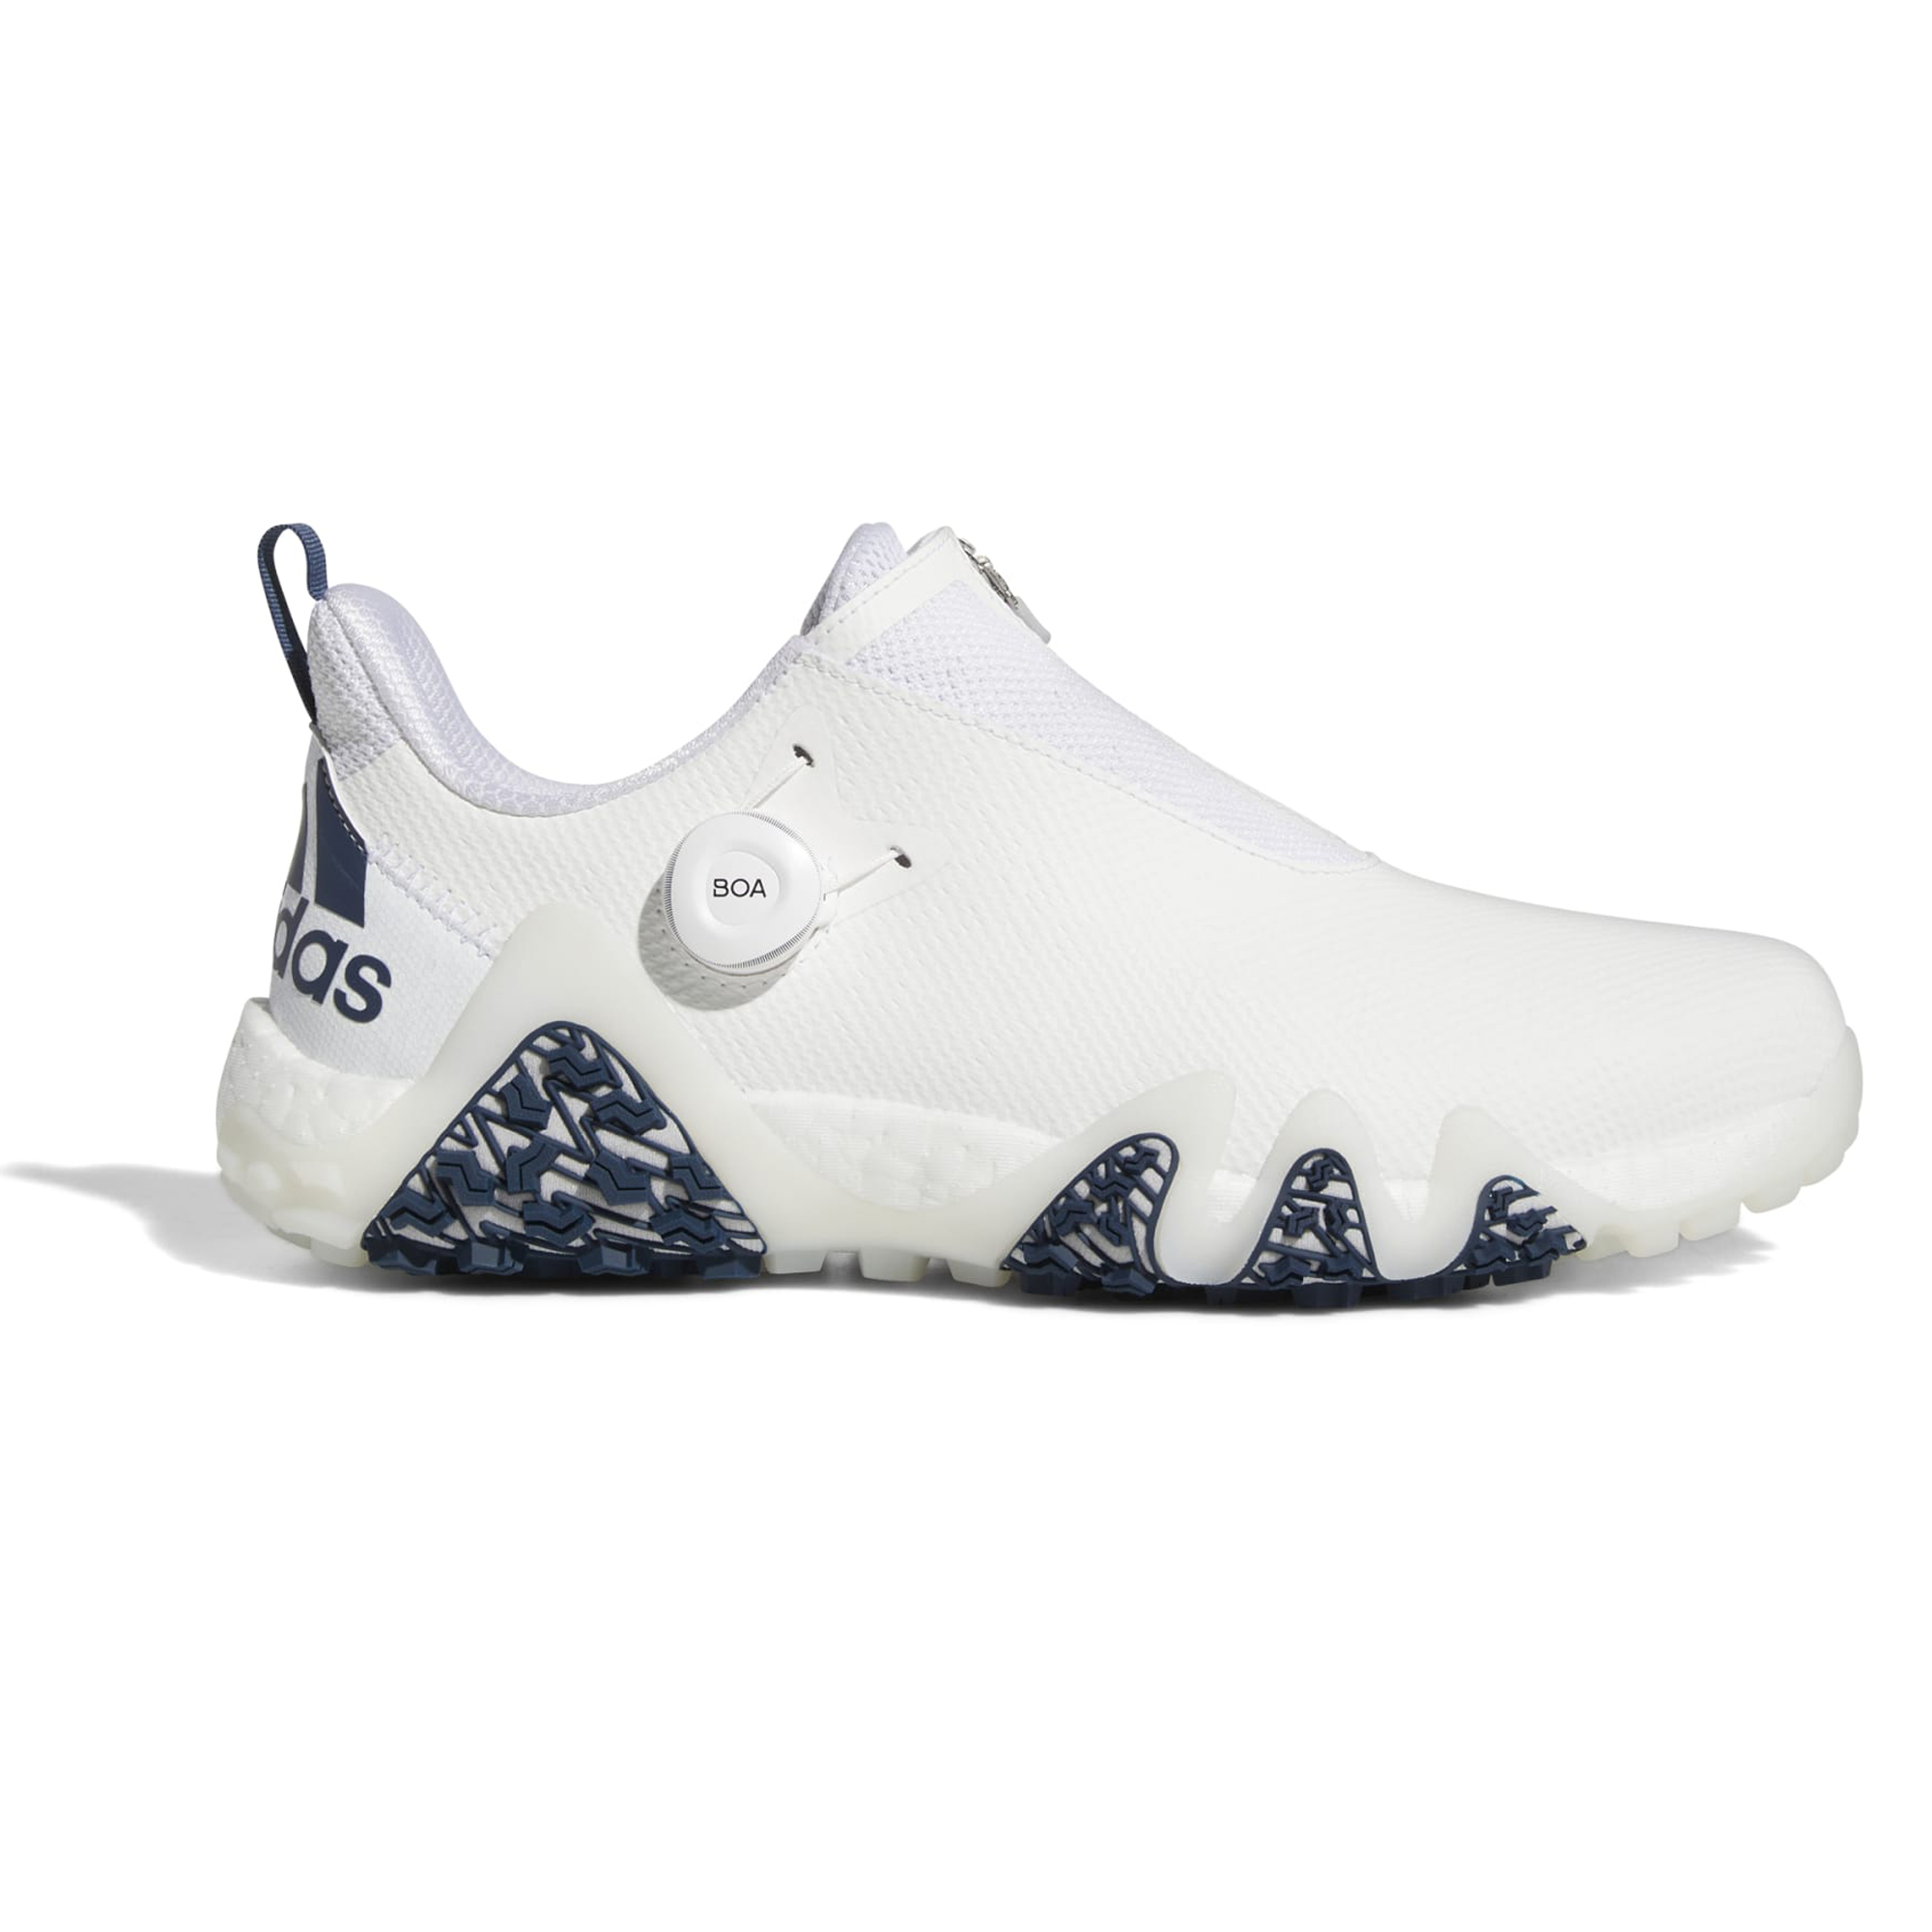 adidas CODECHAOS 22 BOA Mens Spikeless Golf Shoes  - Cloud White/Crew Navy/Crystal White